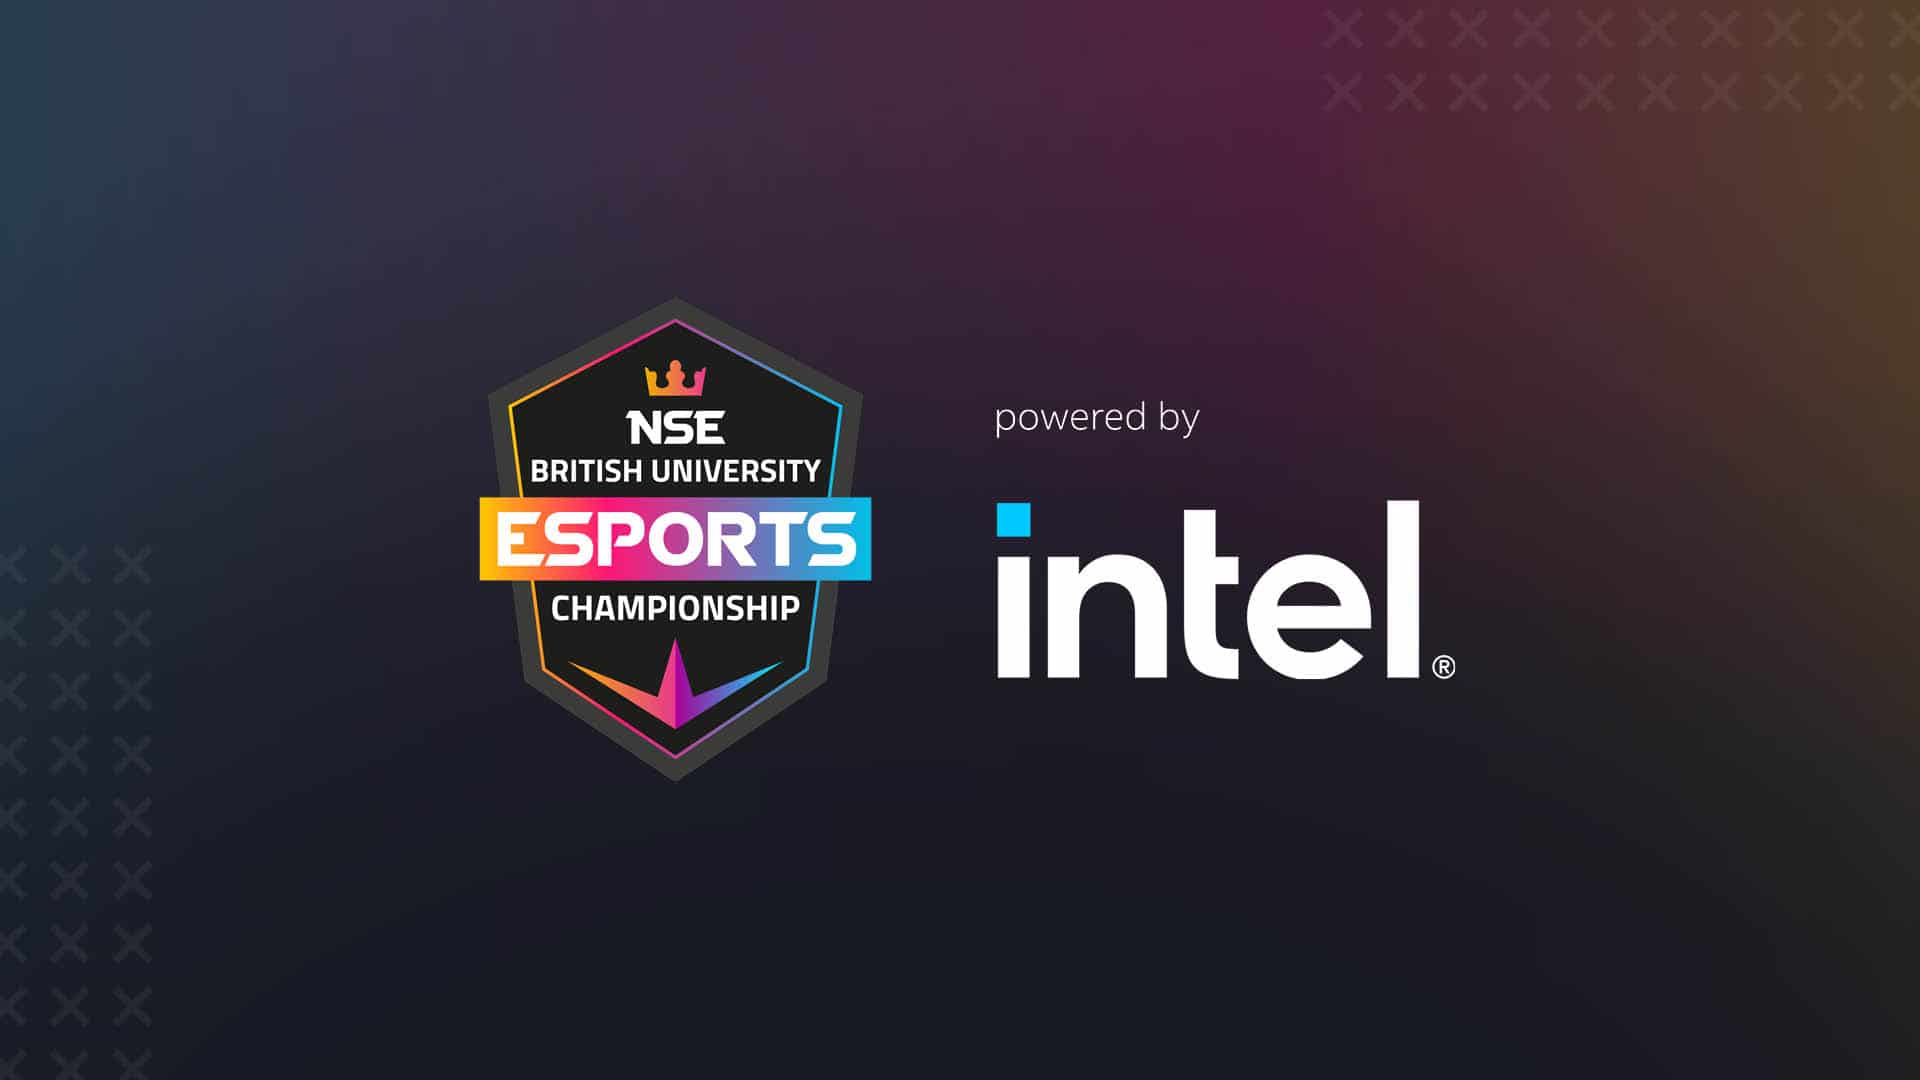 NSE Spring 2021 Finals Roundup: Warwick crowned NSE’s UK Esports University of the Year for third year in a row